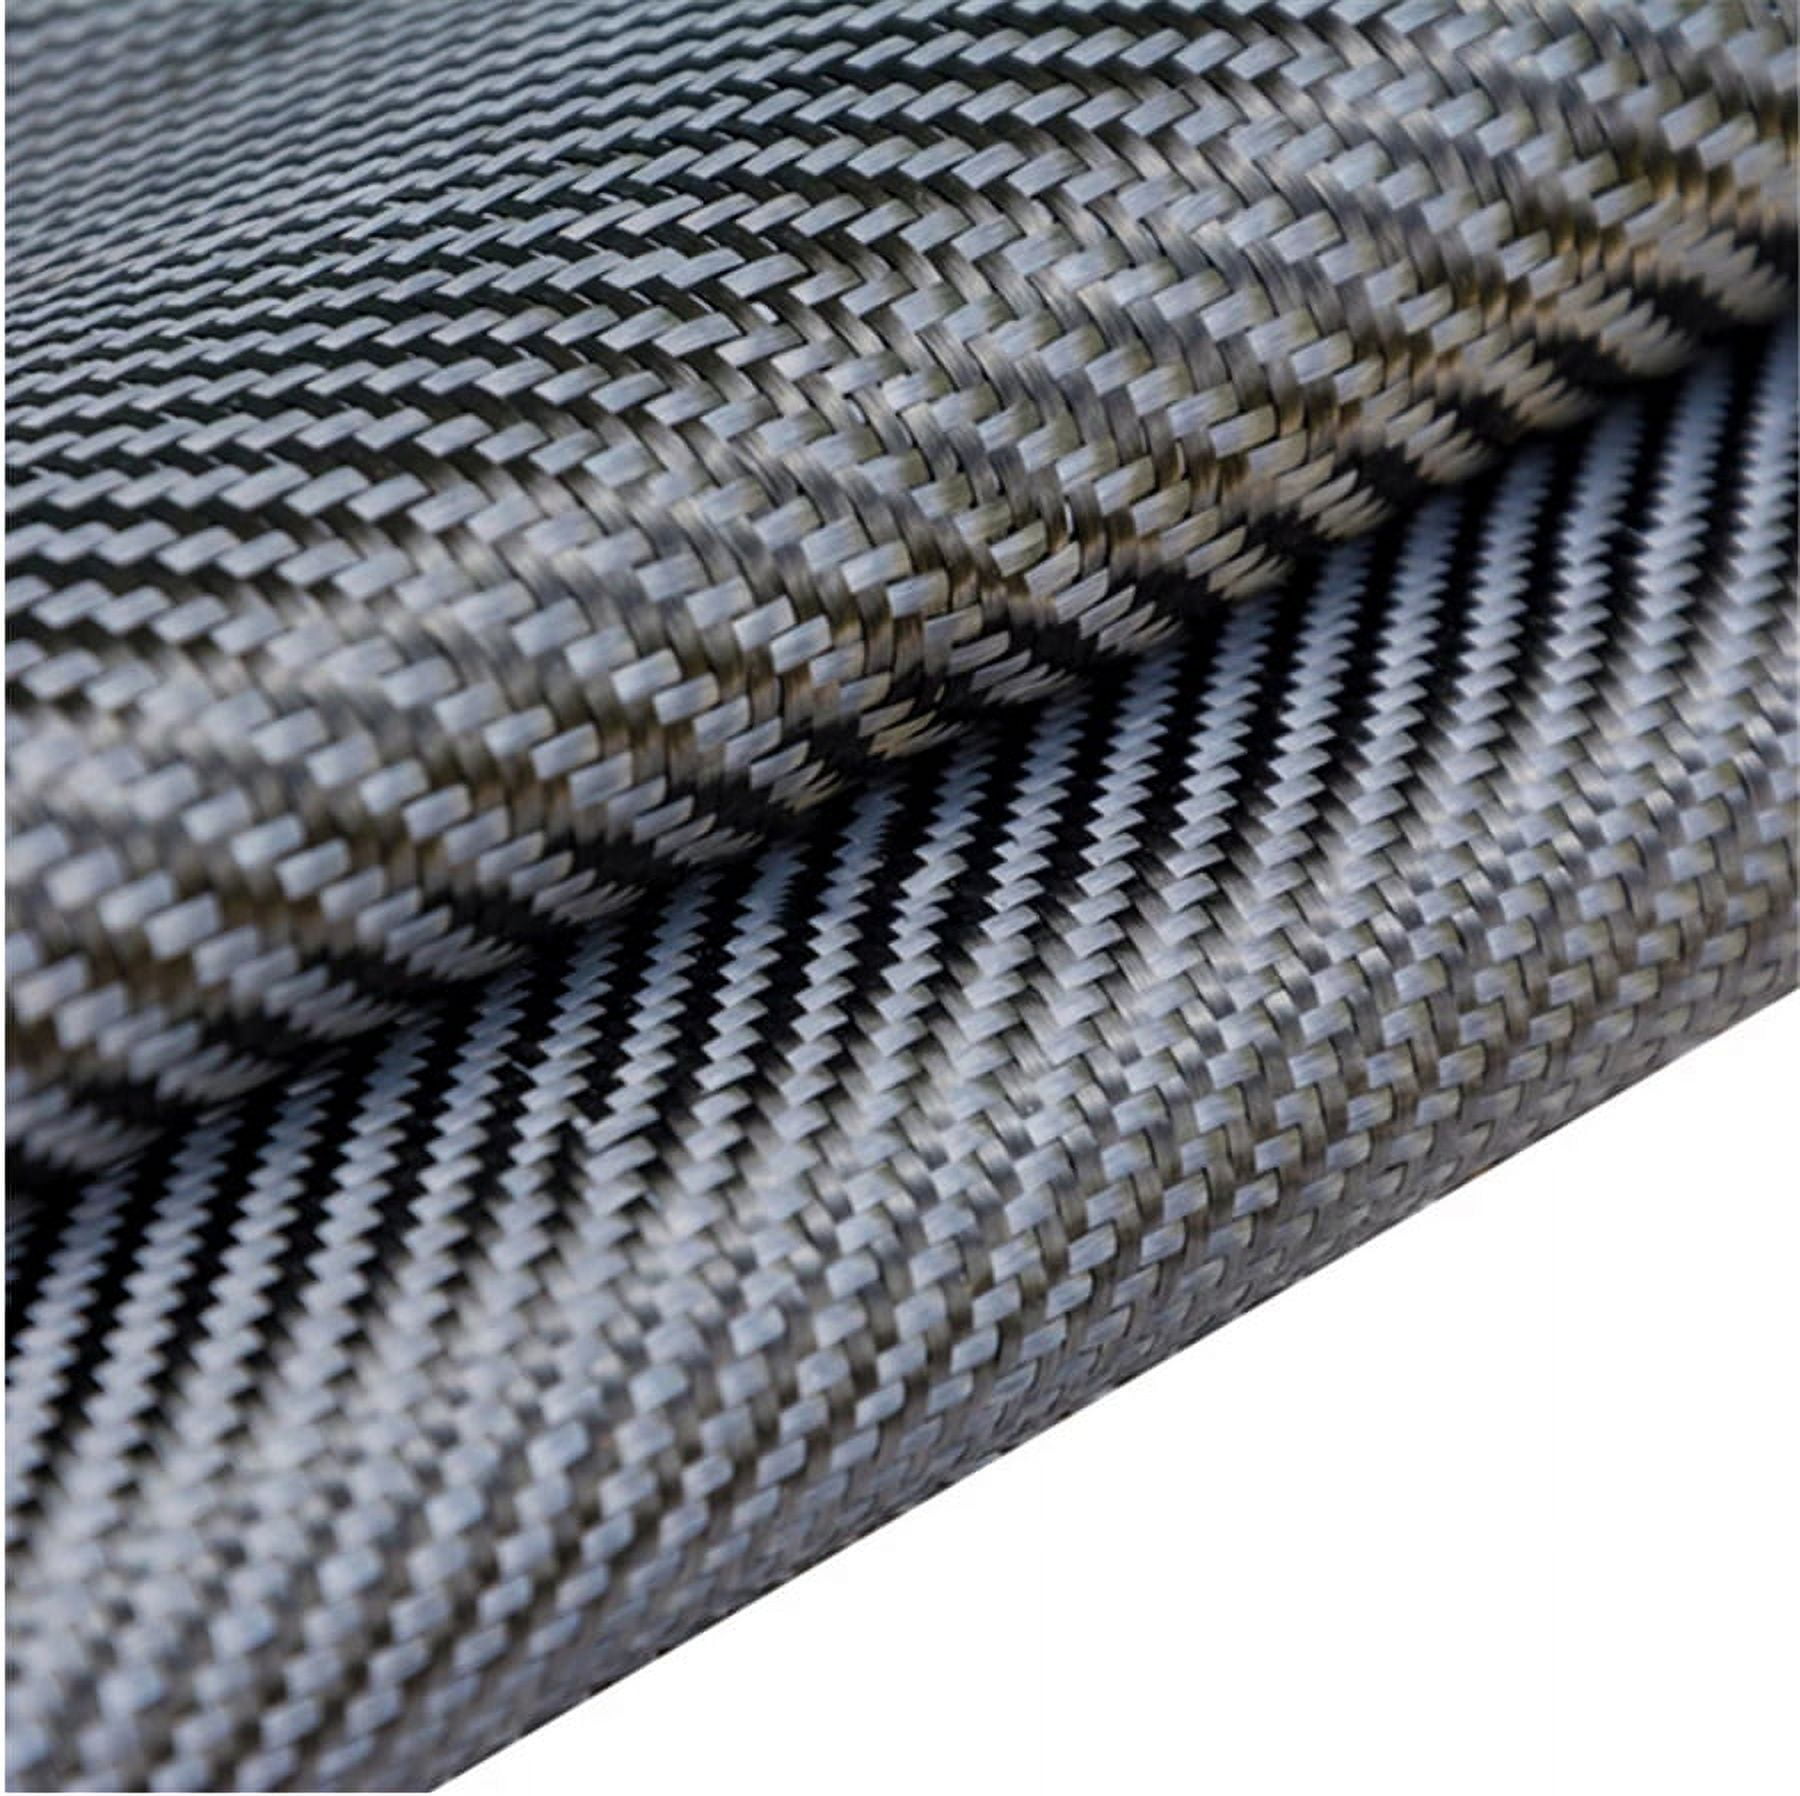 Dry Woven Fabric - Carbon Fiber - 3K 2x2 Twill Weave, 50 Wide x 0.012  Thick - 204 GSM - Various Sizes Available